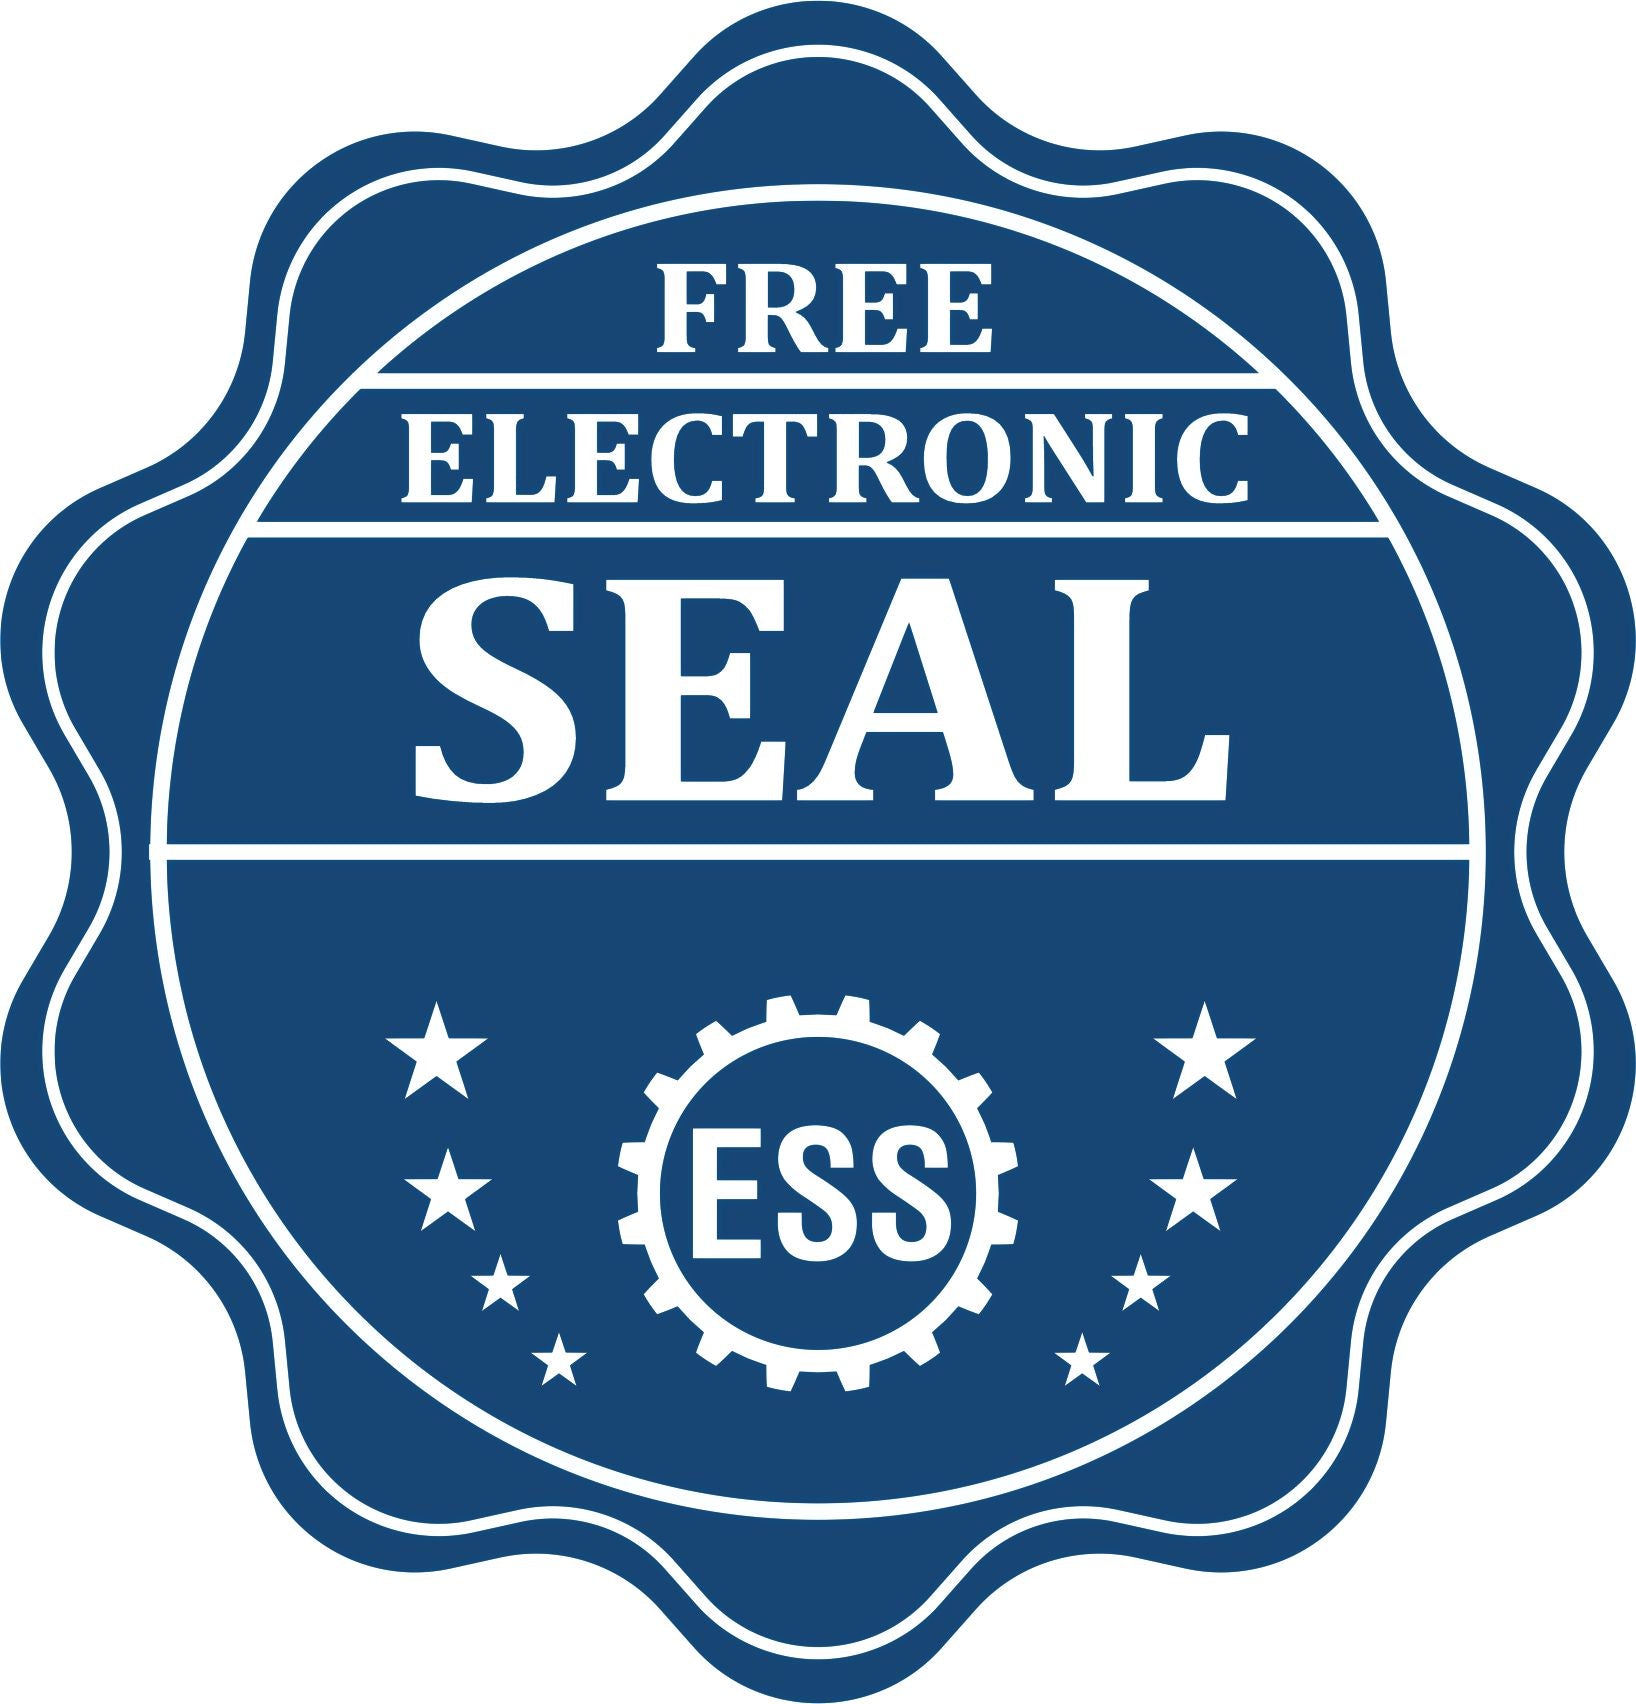 A badge showing a free electronic seal for the Gift Illinois Architect Seal with stars and the ESS gear on the emblem.